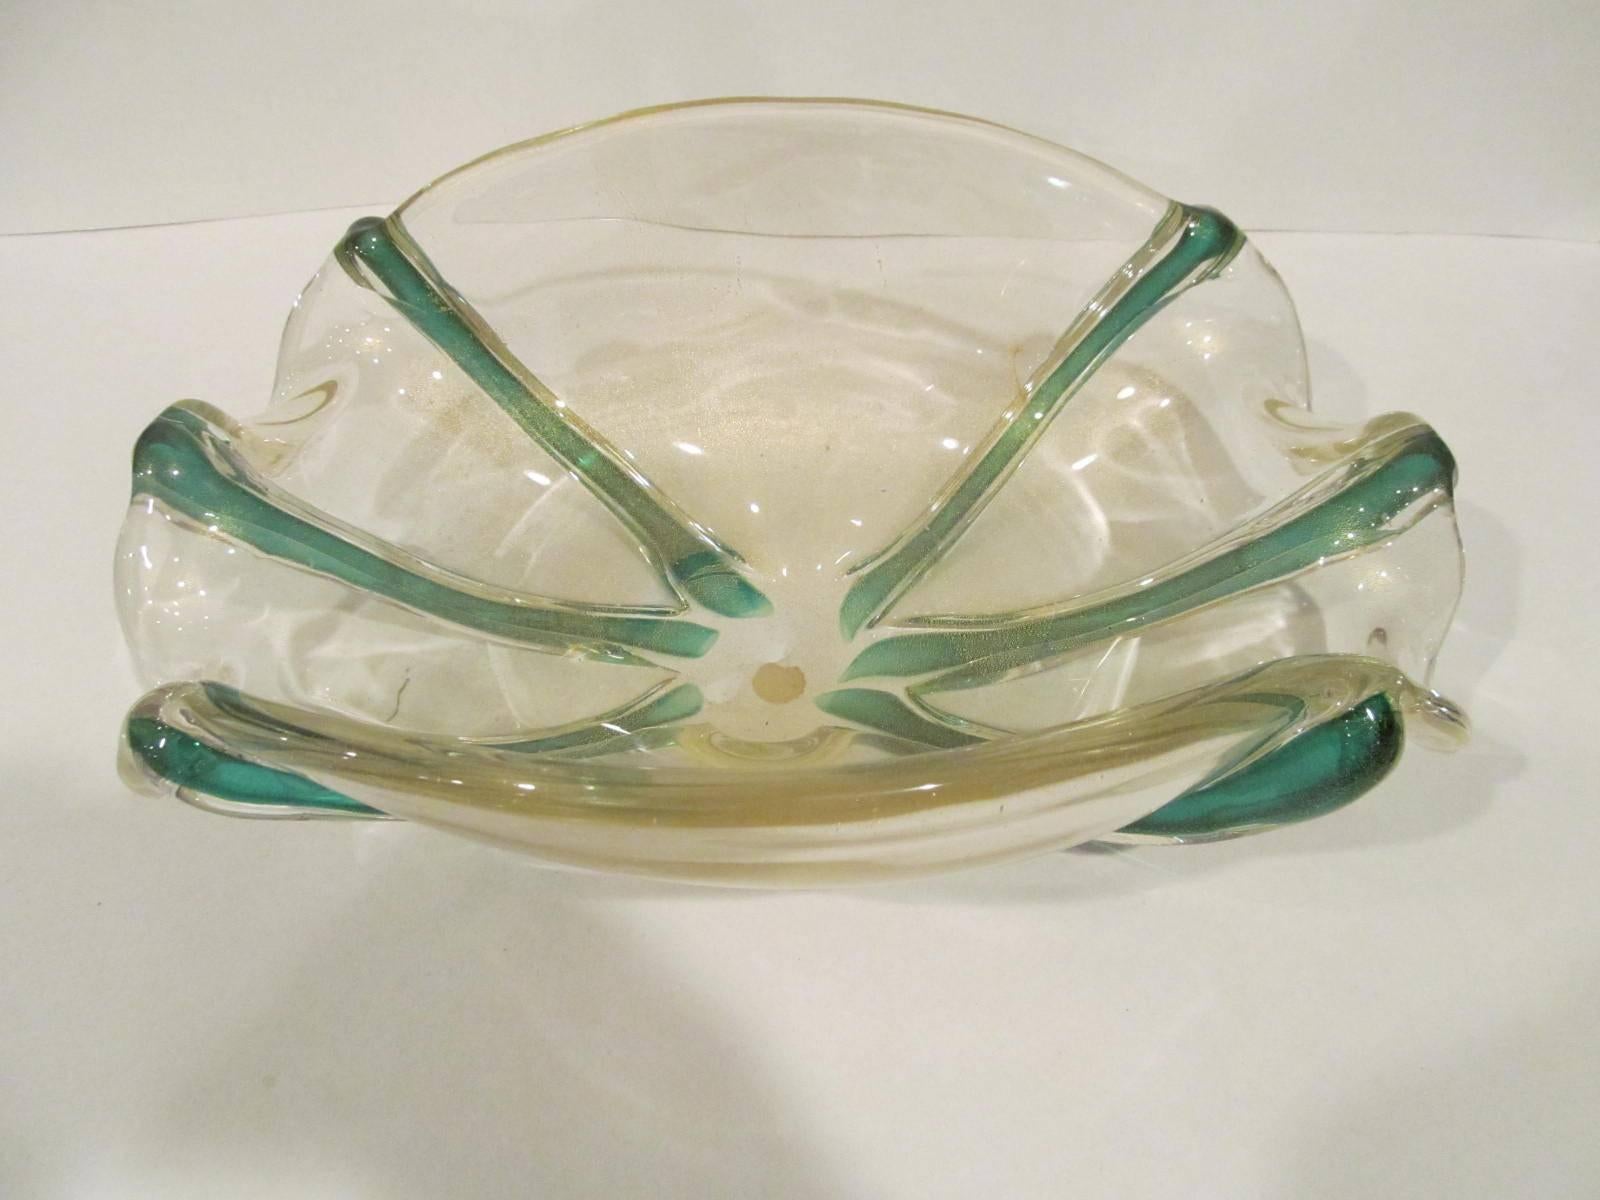 Rare Archimede Seguso centerpiece bowl with applied green canes.